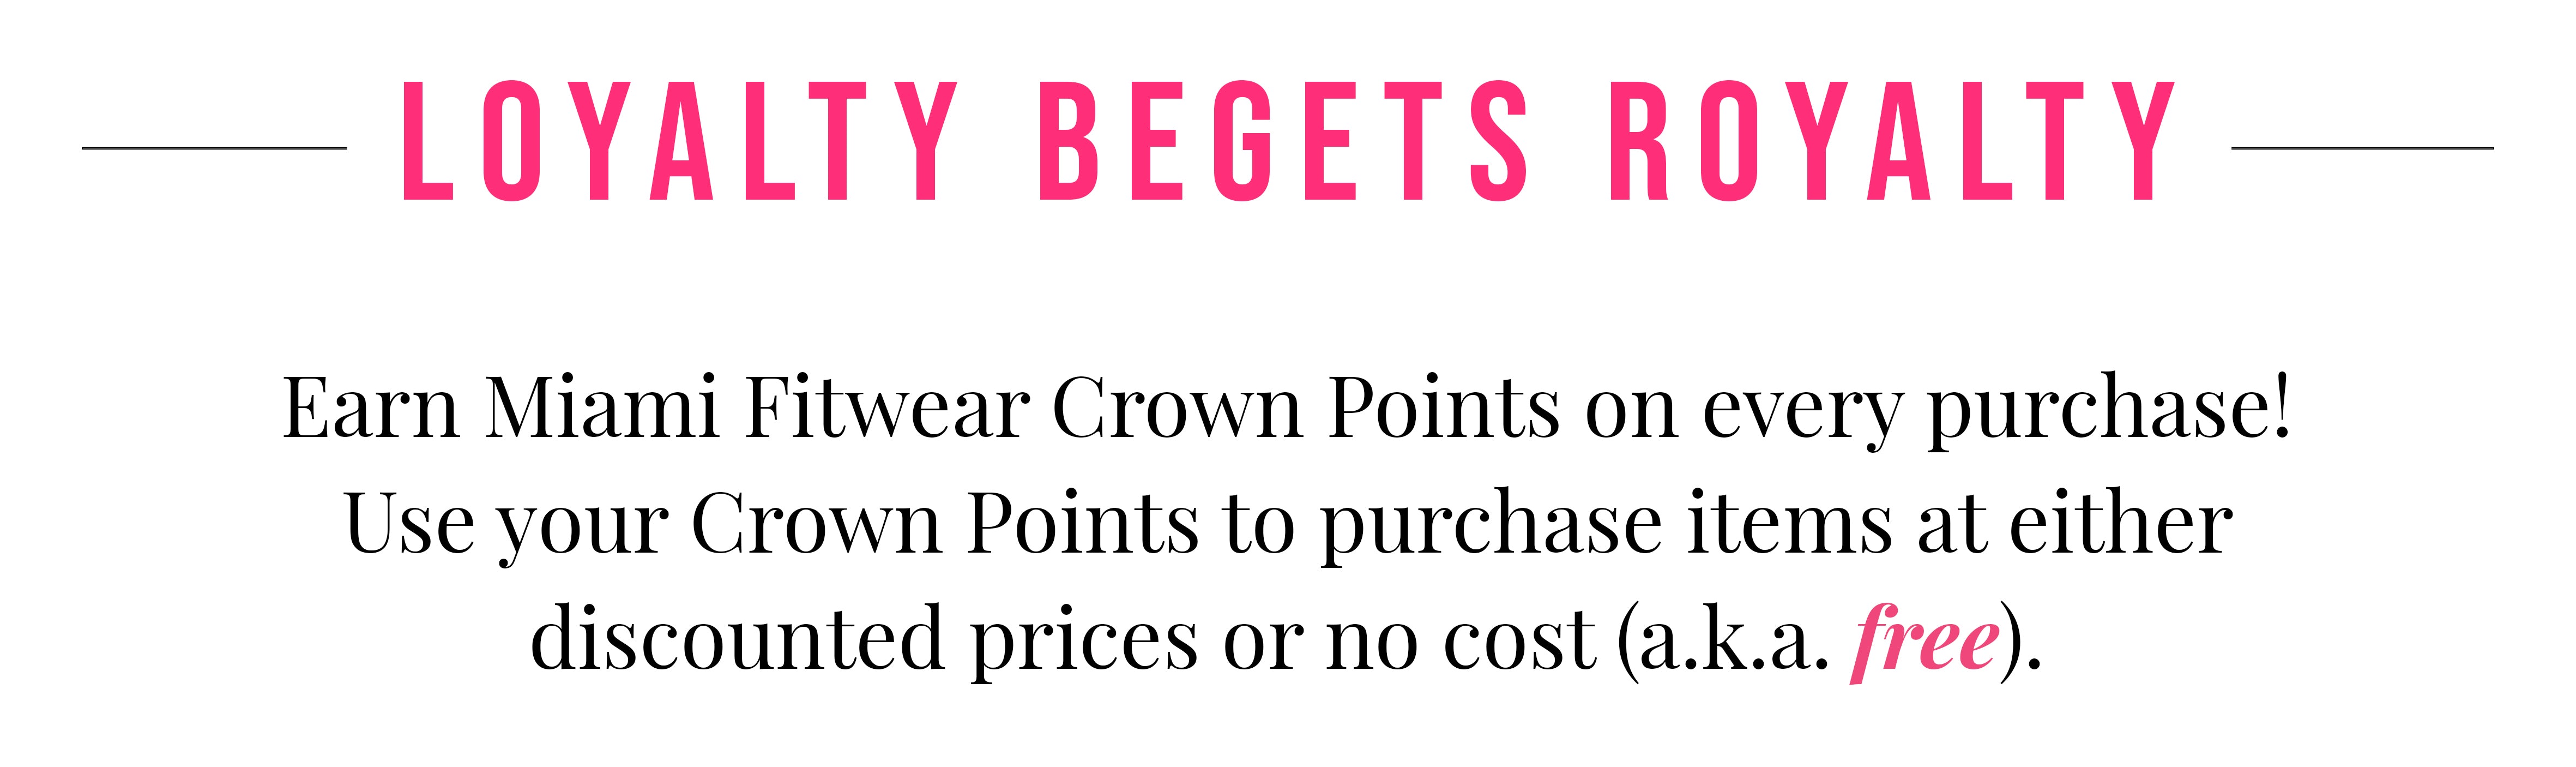 Loyalty Begets Royalty. Earn Miami Fitwear Crown Points on every purchase! Use your Crown Points to purchase items at either discounted prices or no cost (a.k.a free).